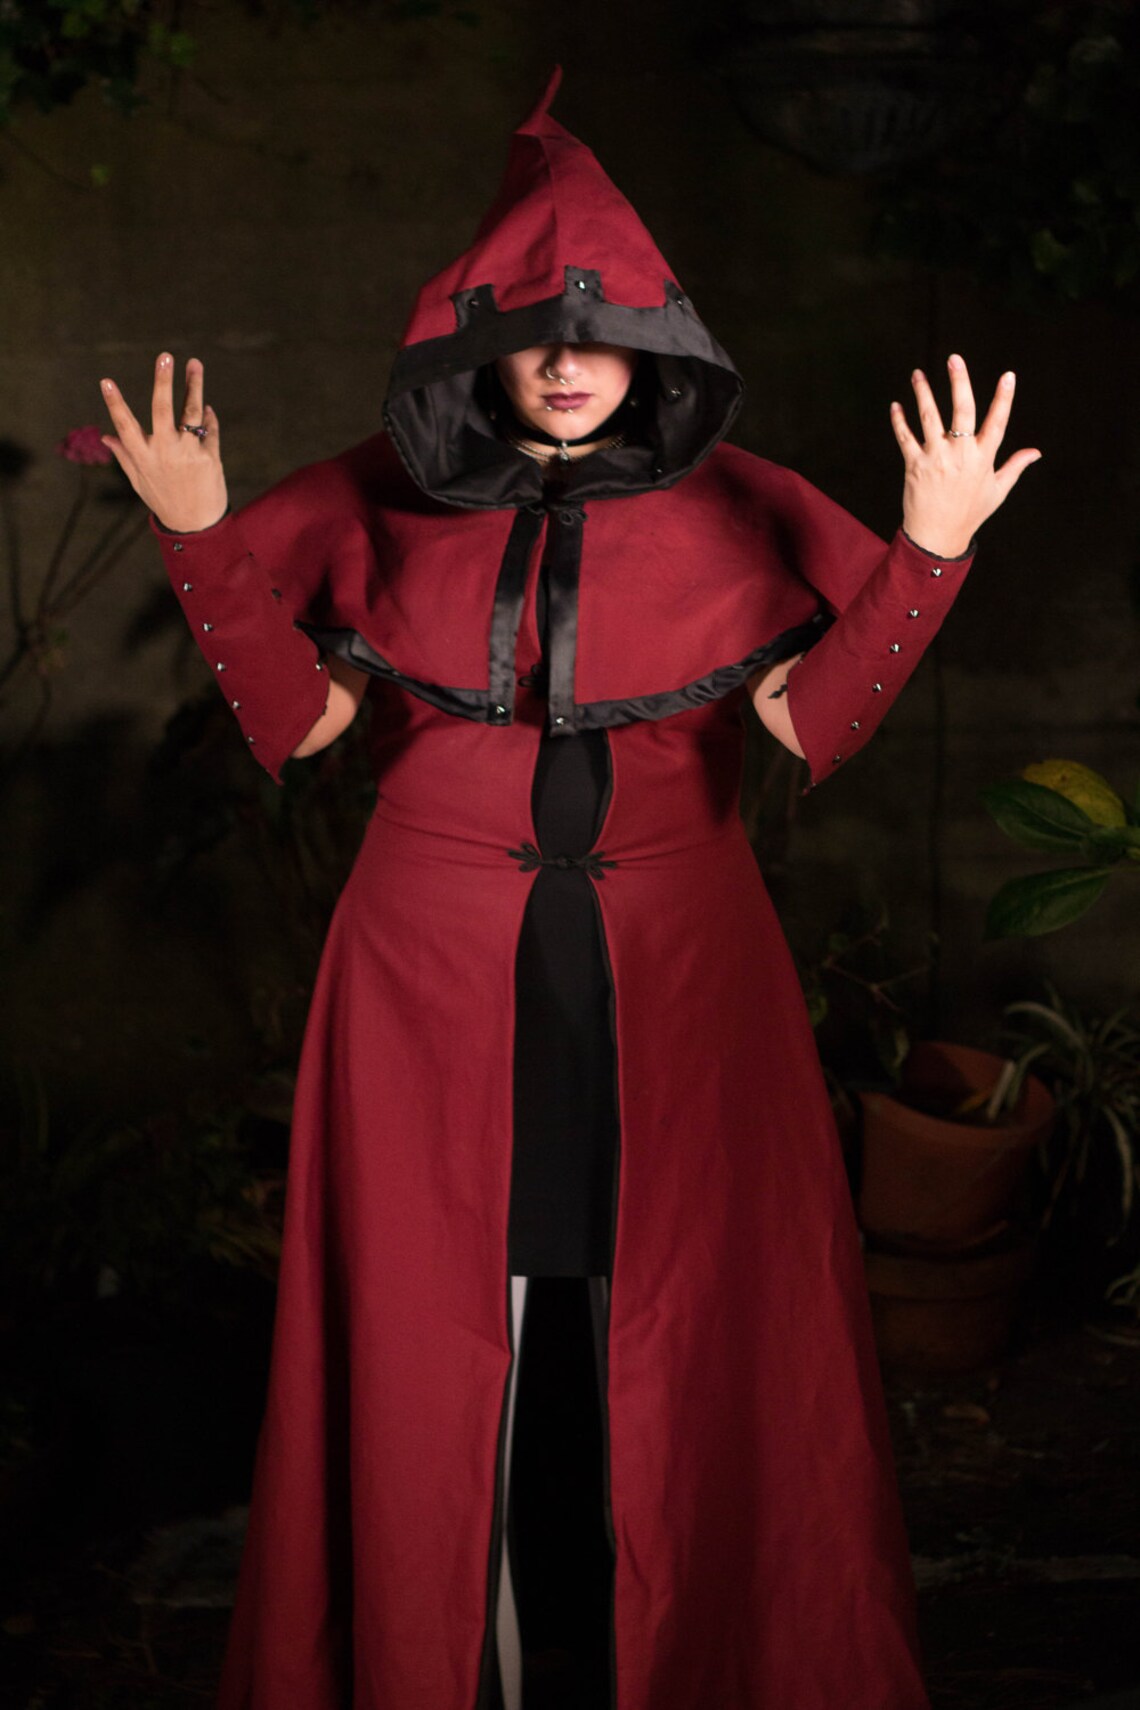 COMPLETE OUTFIT Battle Mage Burgundy Red and Black Robe - Etsy